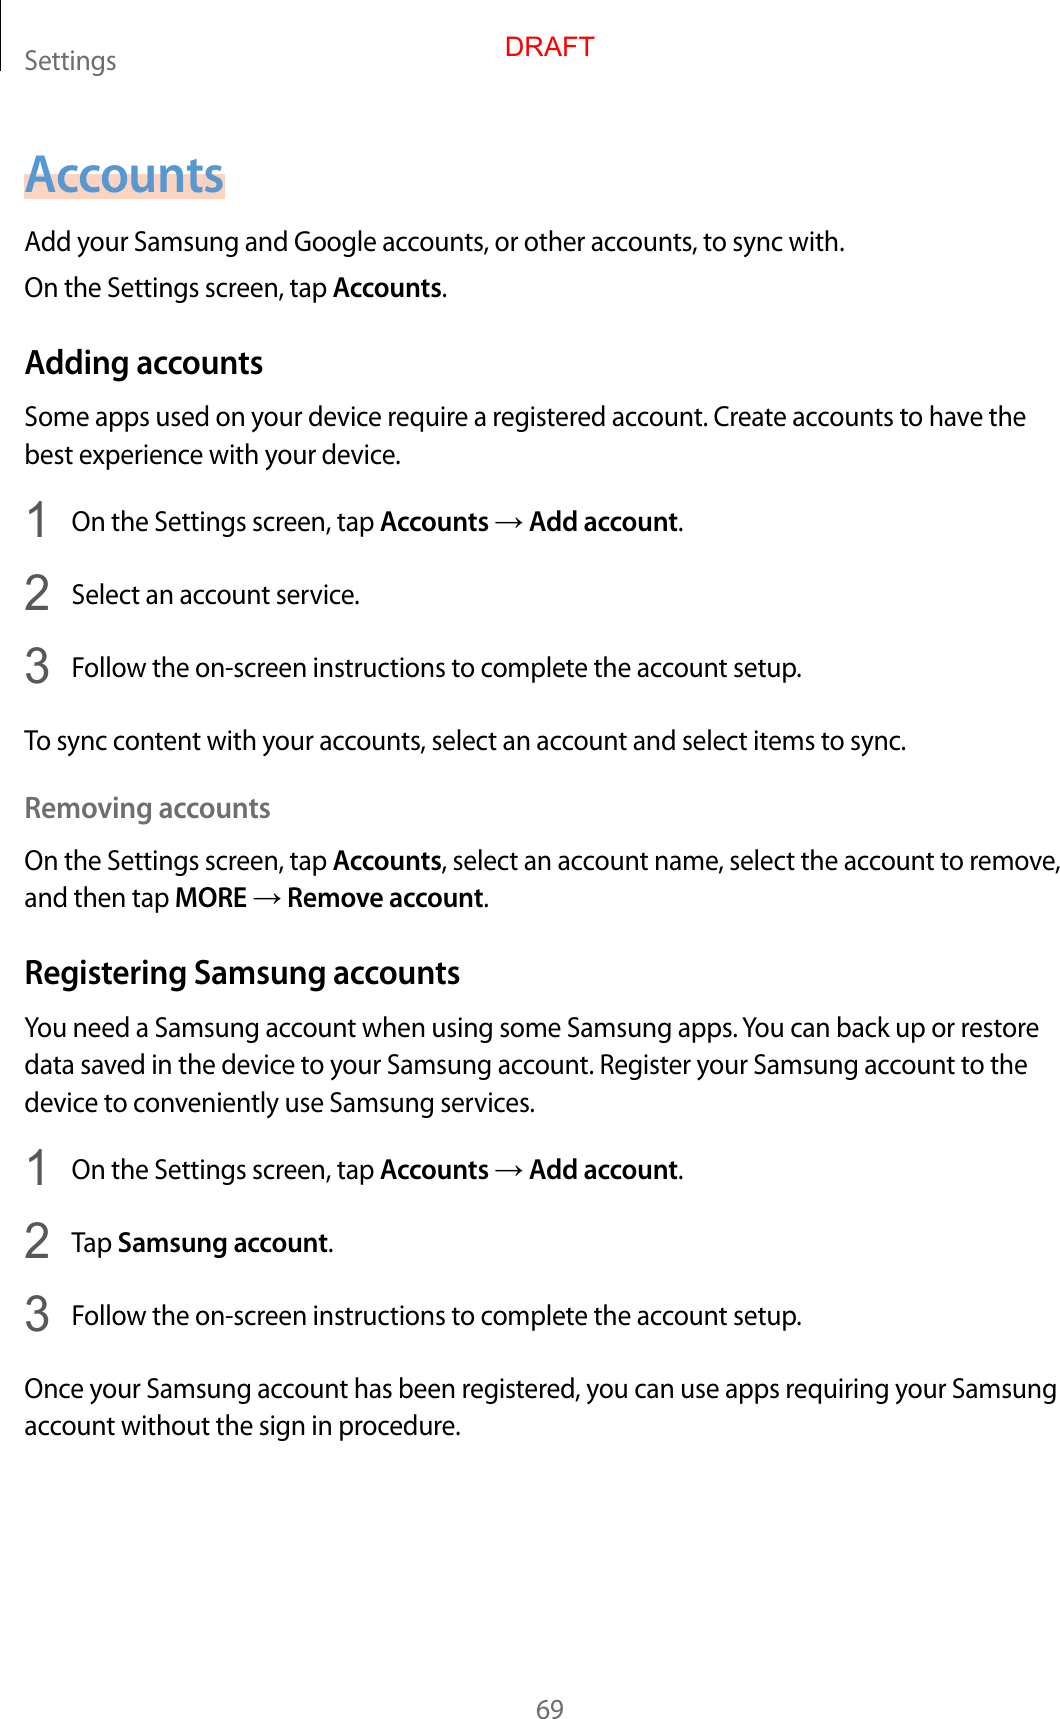 Settings69AccountsAdd your Samsung and Google accounts, or other accounts, to sync with.On the Settings screen, tap Accounts.Adding accountsSome apps used on your device require a registered account. Create accounts to have the best experience with your device.1  On the Settings screen, tap Accounts → Add account.2  Select an account service.3  Follow the on-screen instructions to complete the account setup.To sync content with your accounts, select an account and select items to sync.Removing accountsOn the Settings screen, tap Accounts, select an account name, select the account to remove, and then tap MORE → Remove account.Registering Samsung accountsYou need a Samsung account when using some Samsung apps. You can back up or restore data saved in the device to your Samsung account. Register your Samsung account to the device to conveniently use Samsung services.1  On the Settings screen, tap Accounts → Add account.2  Tap Samsung account.3  Follow the on-screen instructions to complete the account setup.Once your Samsung account has been registered, you can use apps requiring your Samsung account without the sign in procedure.DRAFT